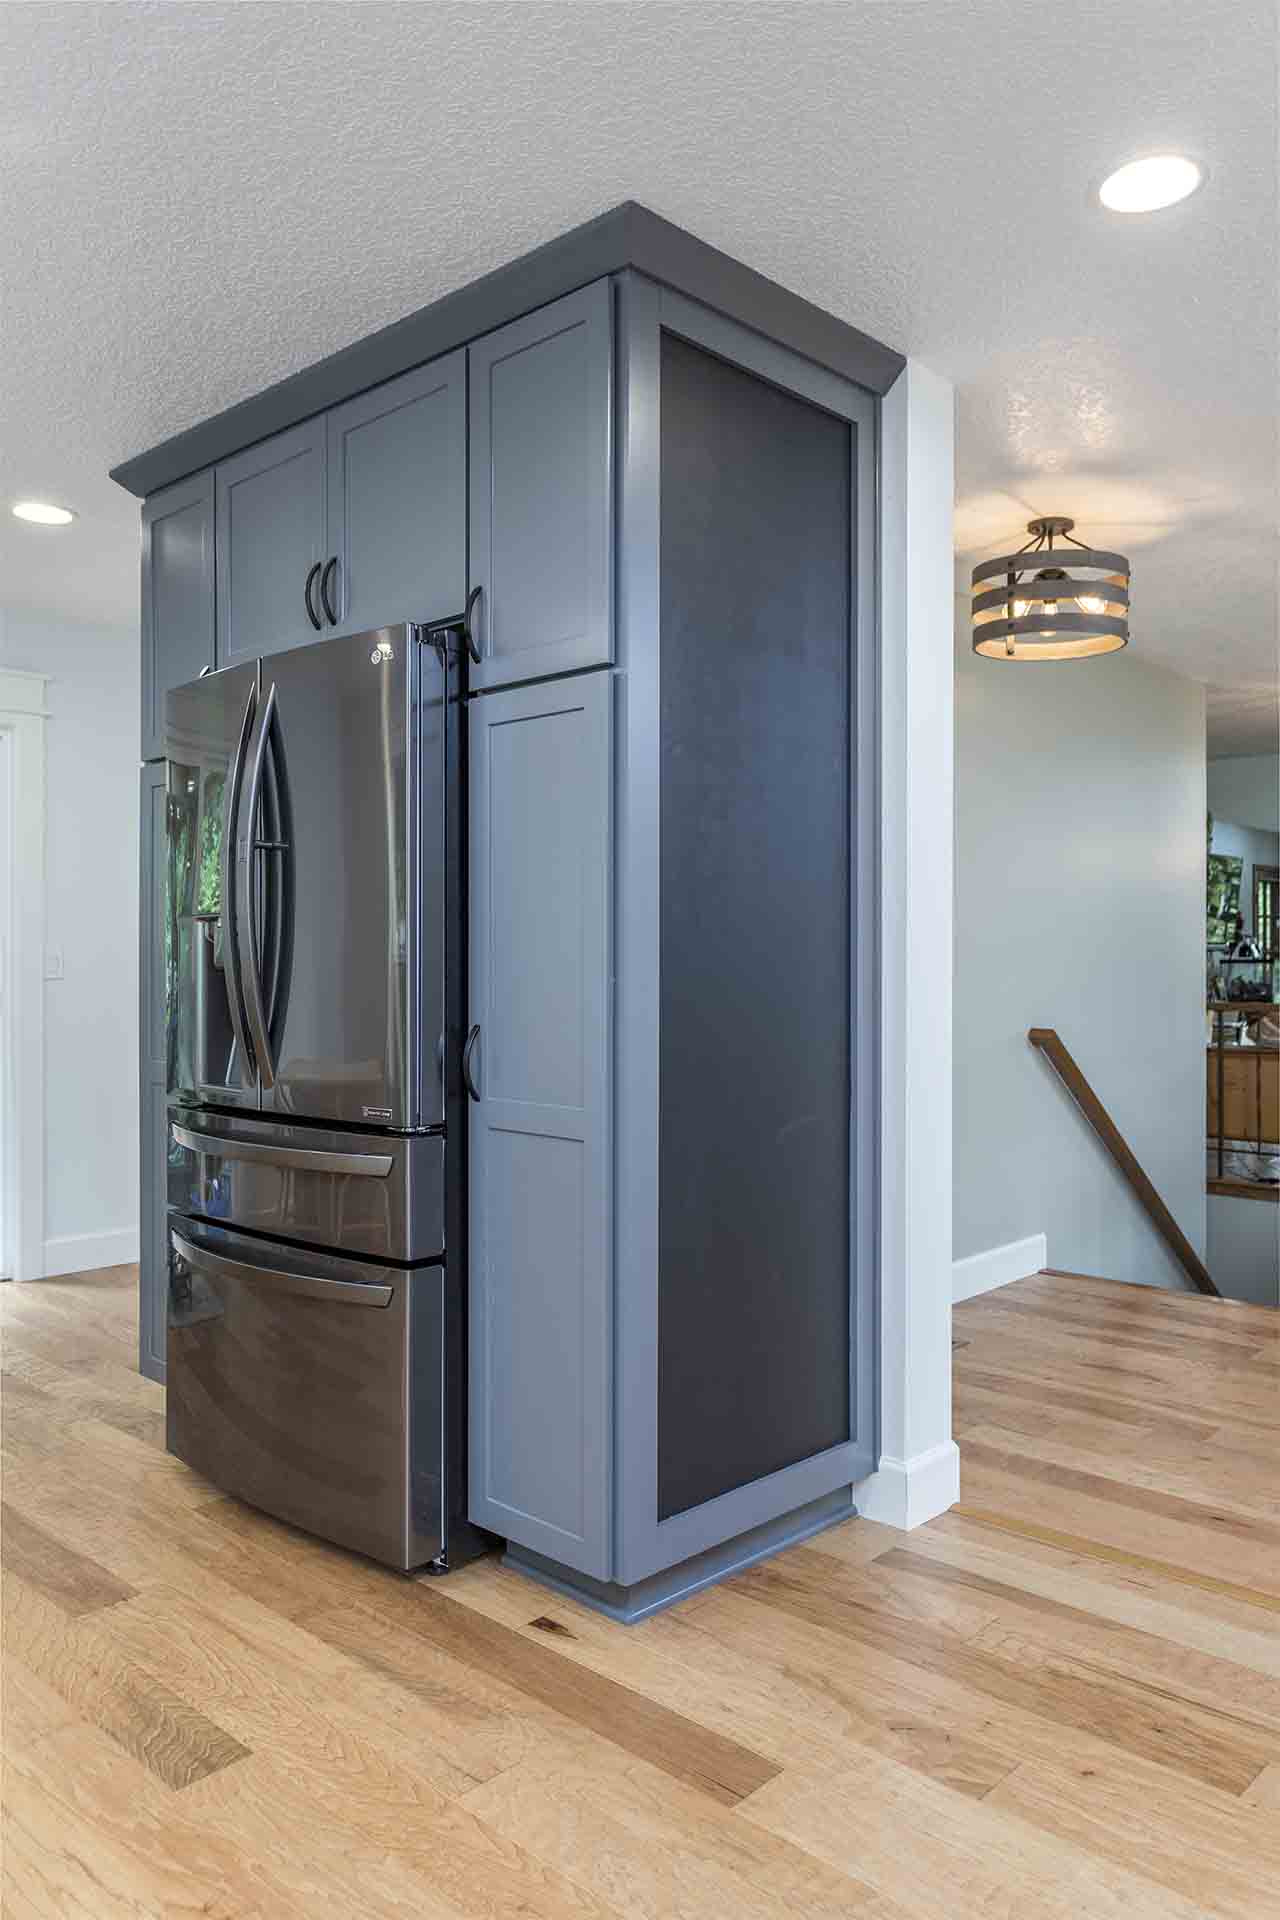 Fridge and pantry with chalkboard 